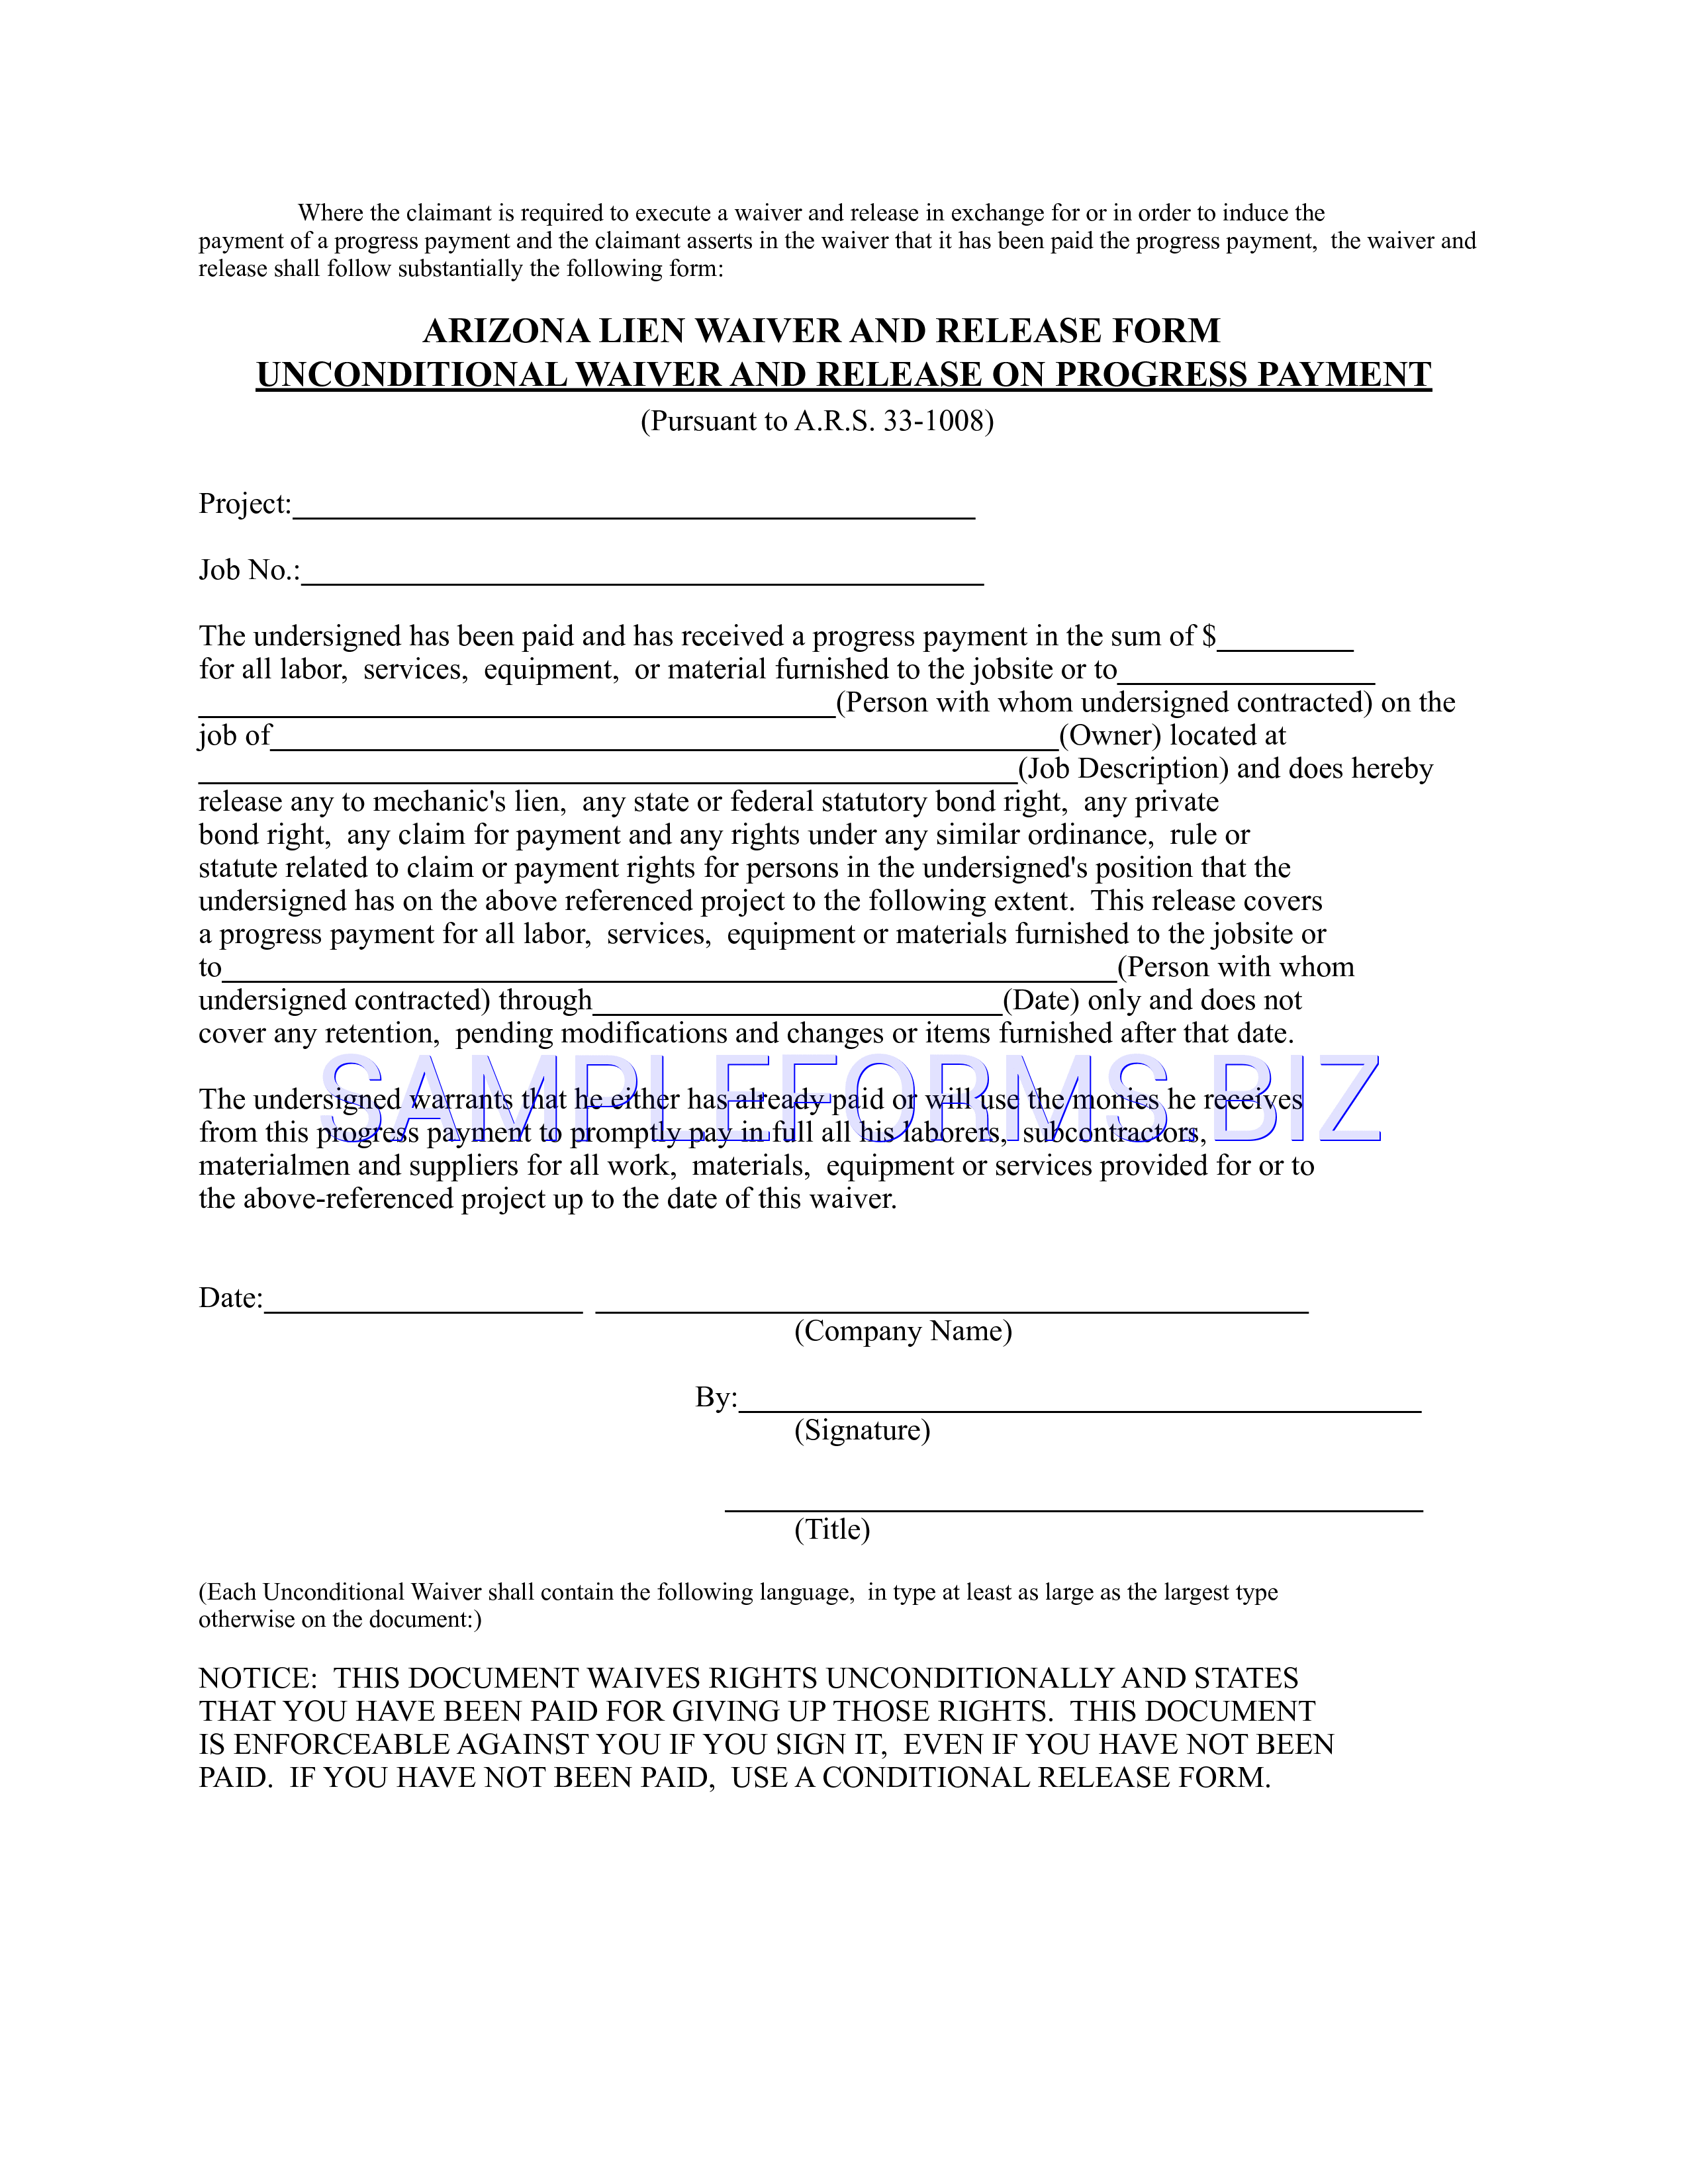 Preview free downloadable Arizona Unconditional Waiver And Release On Progress Payment in PDF (page 1)